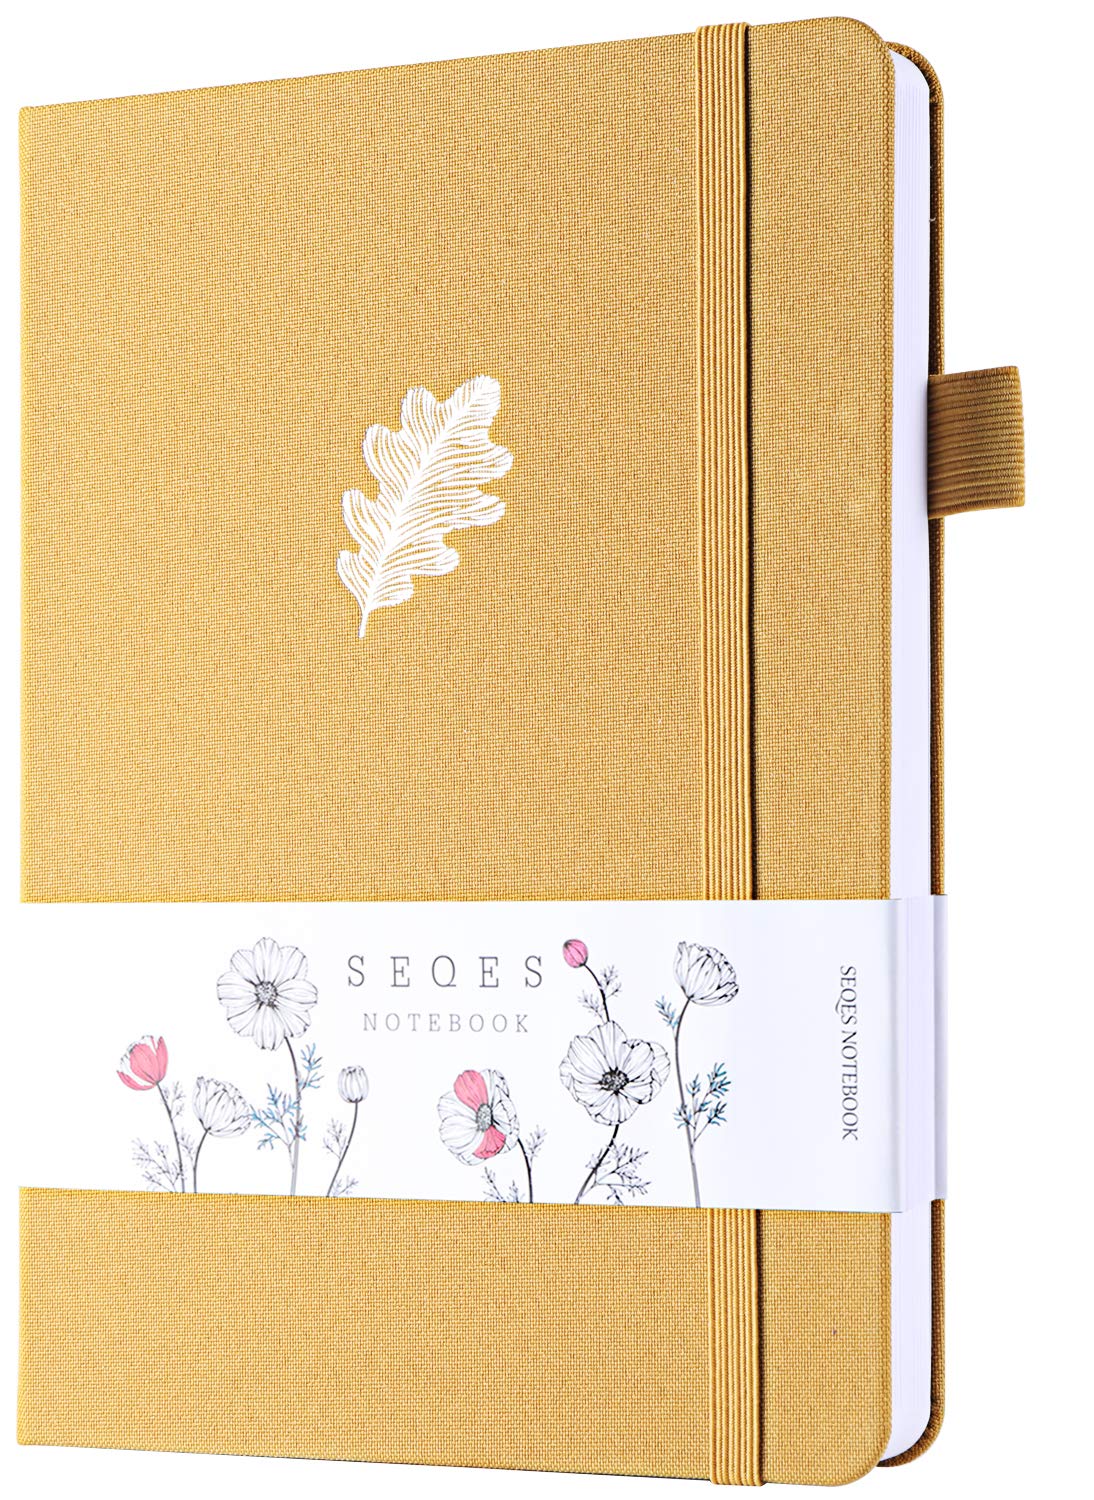 SeQeS Bullet Dotted Journal - A5 Dot Grid Notebook with Pages number,160gsm Bleedproof Paper and Fabric Hardcover for Personal O